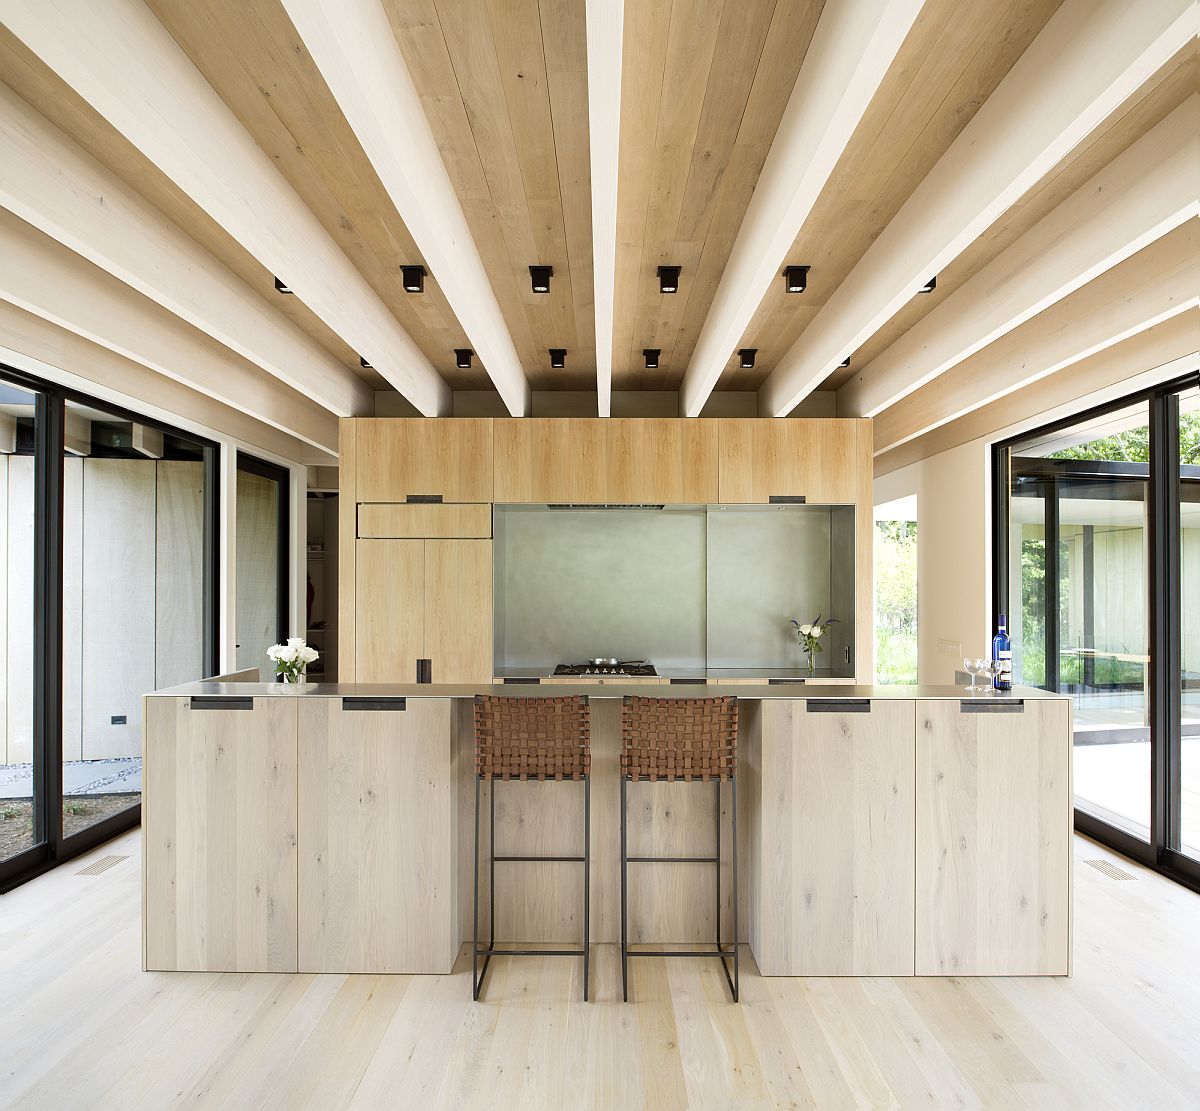 Wooden-ceiling-beams-give-the-interior-a-warm-ambaince